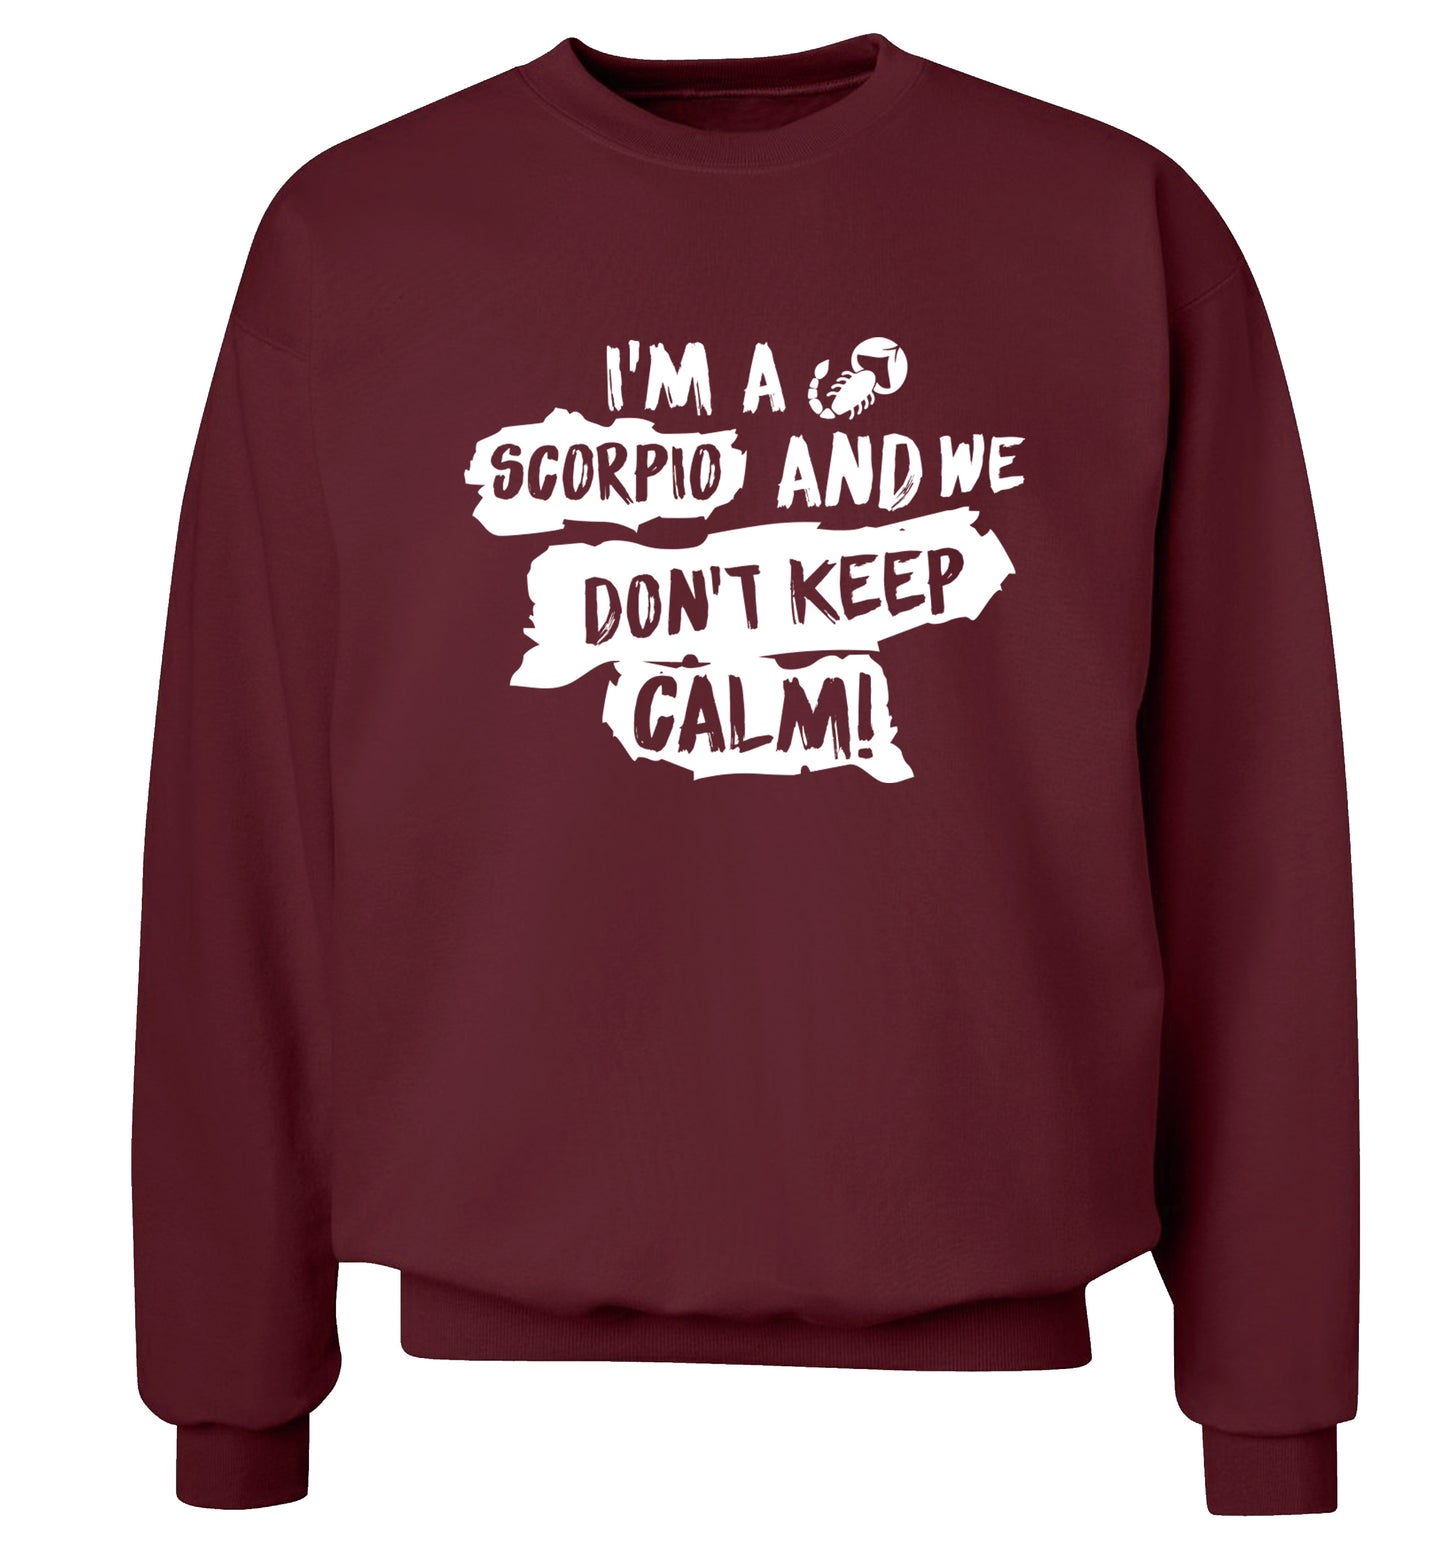 I'm a scorpio and we don't keep calm Adult's unisex maroon Sweater 2XL